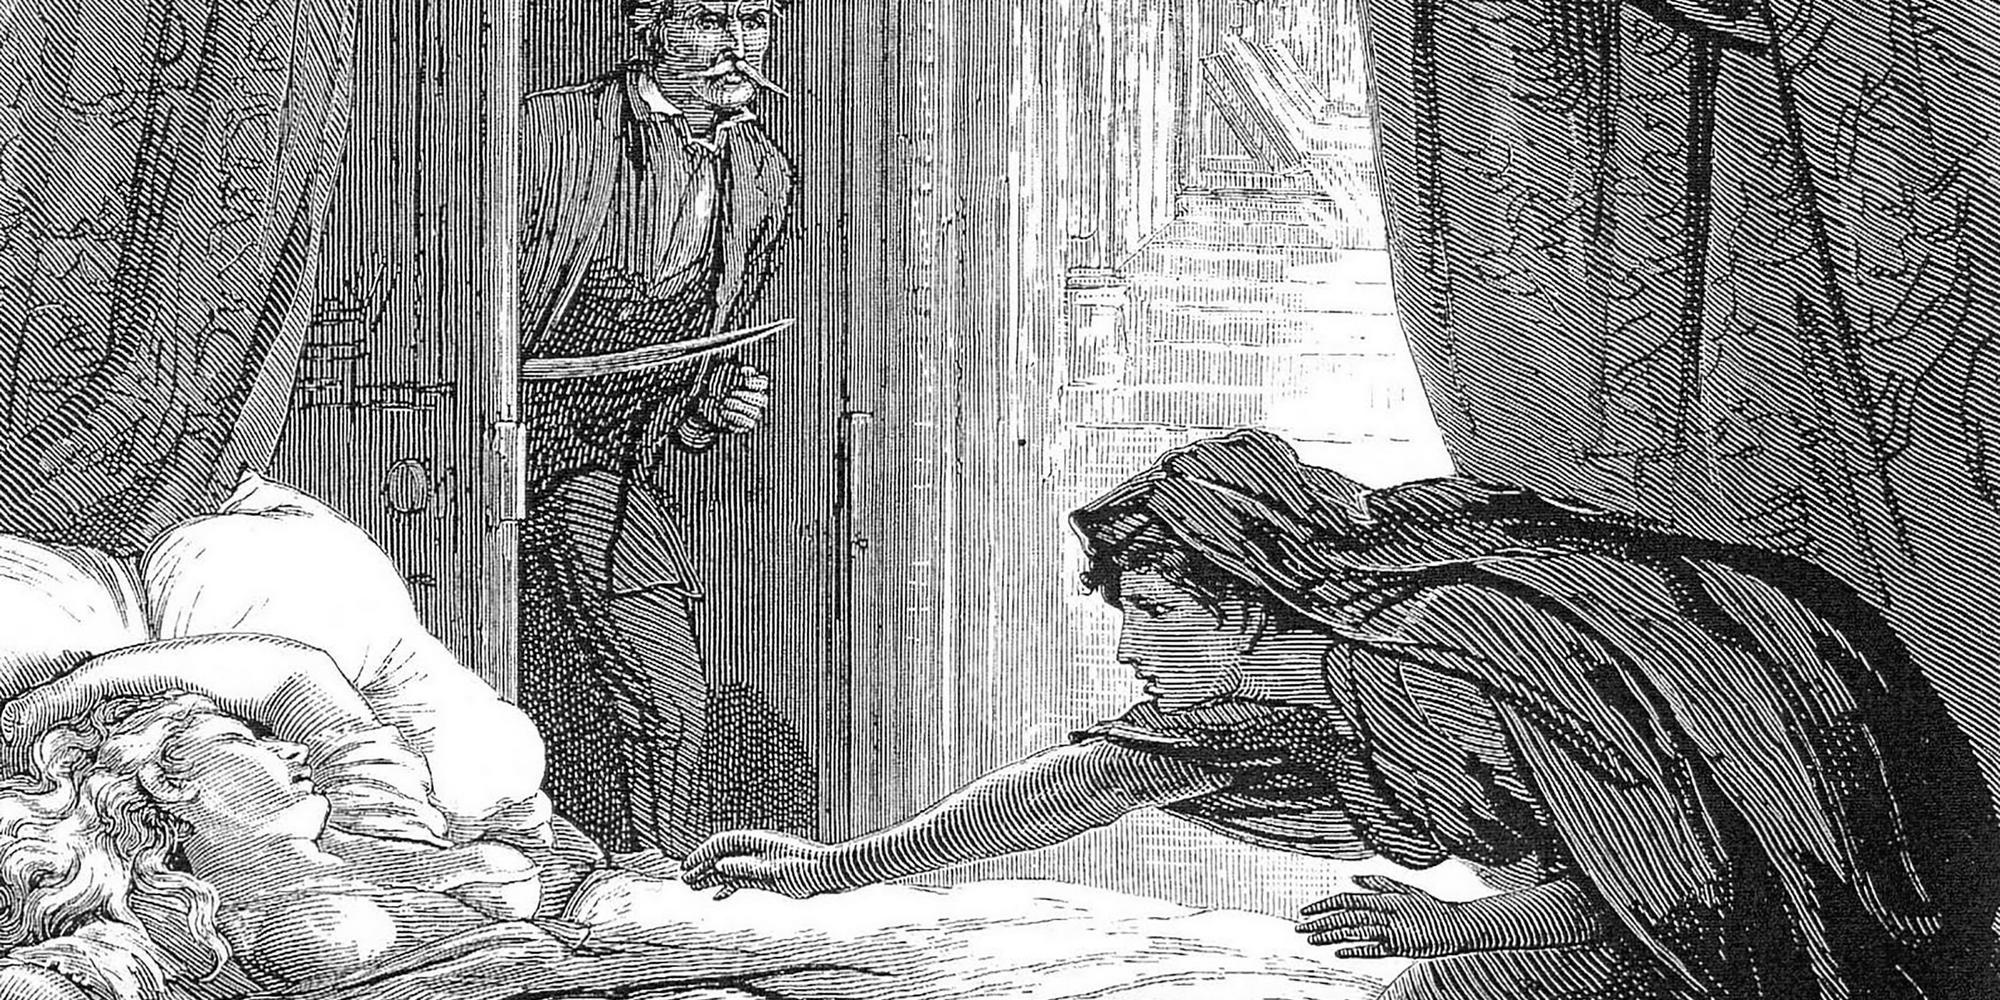 SHERIDAN LE FANU (1814-1873) Irish author of horror fiction and Gothic tales. Engraving from his 1872 Gothic novel "Carmilla" showing the vampire Carmilla attacking the sleeping Bertha Rheinfeldt as the General appears with a knife.